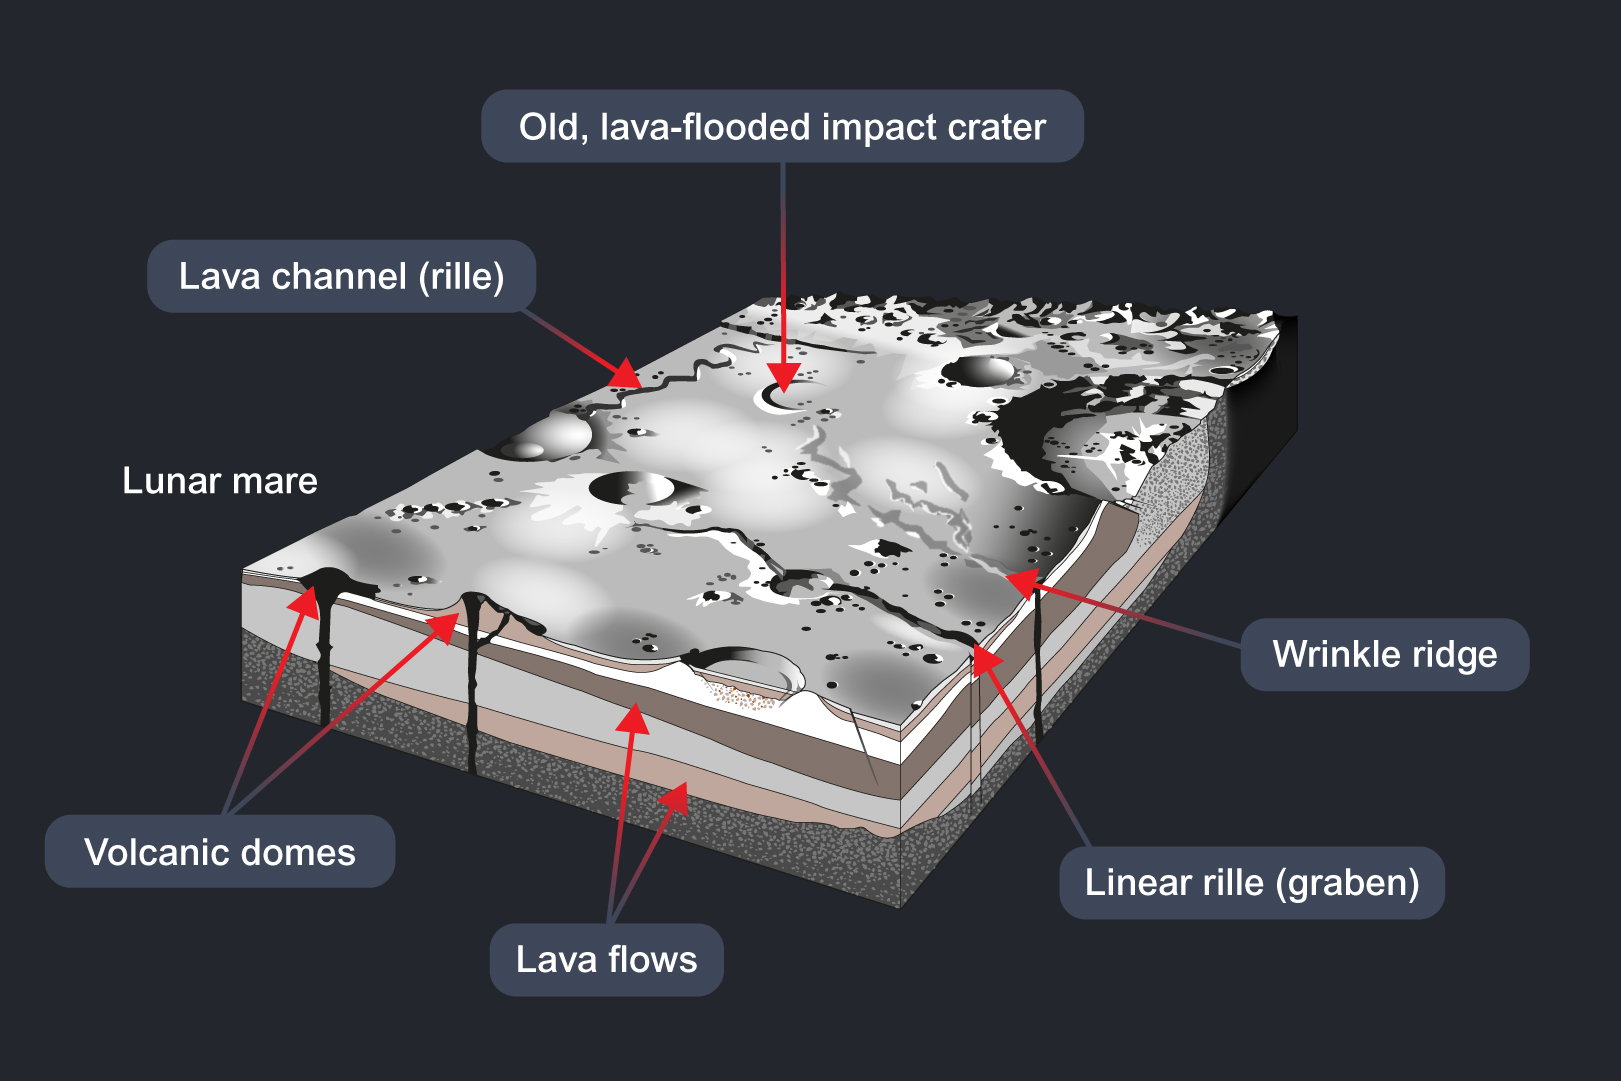 A fully labelled cross section of the surface of the Moon showing volcanic features. The labels show the old, lava-flooded impact crater. Wrinkle ridge. Linear rille (graben). Lava flows. Volcanic domes. And lava channel (rille).